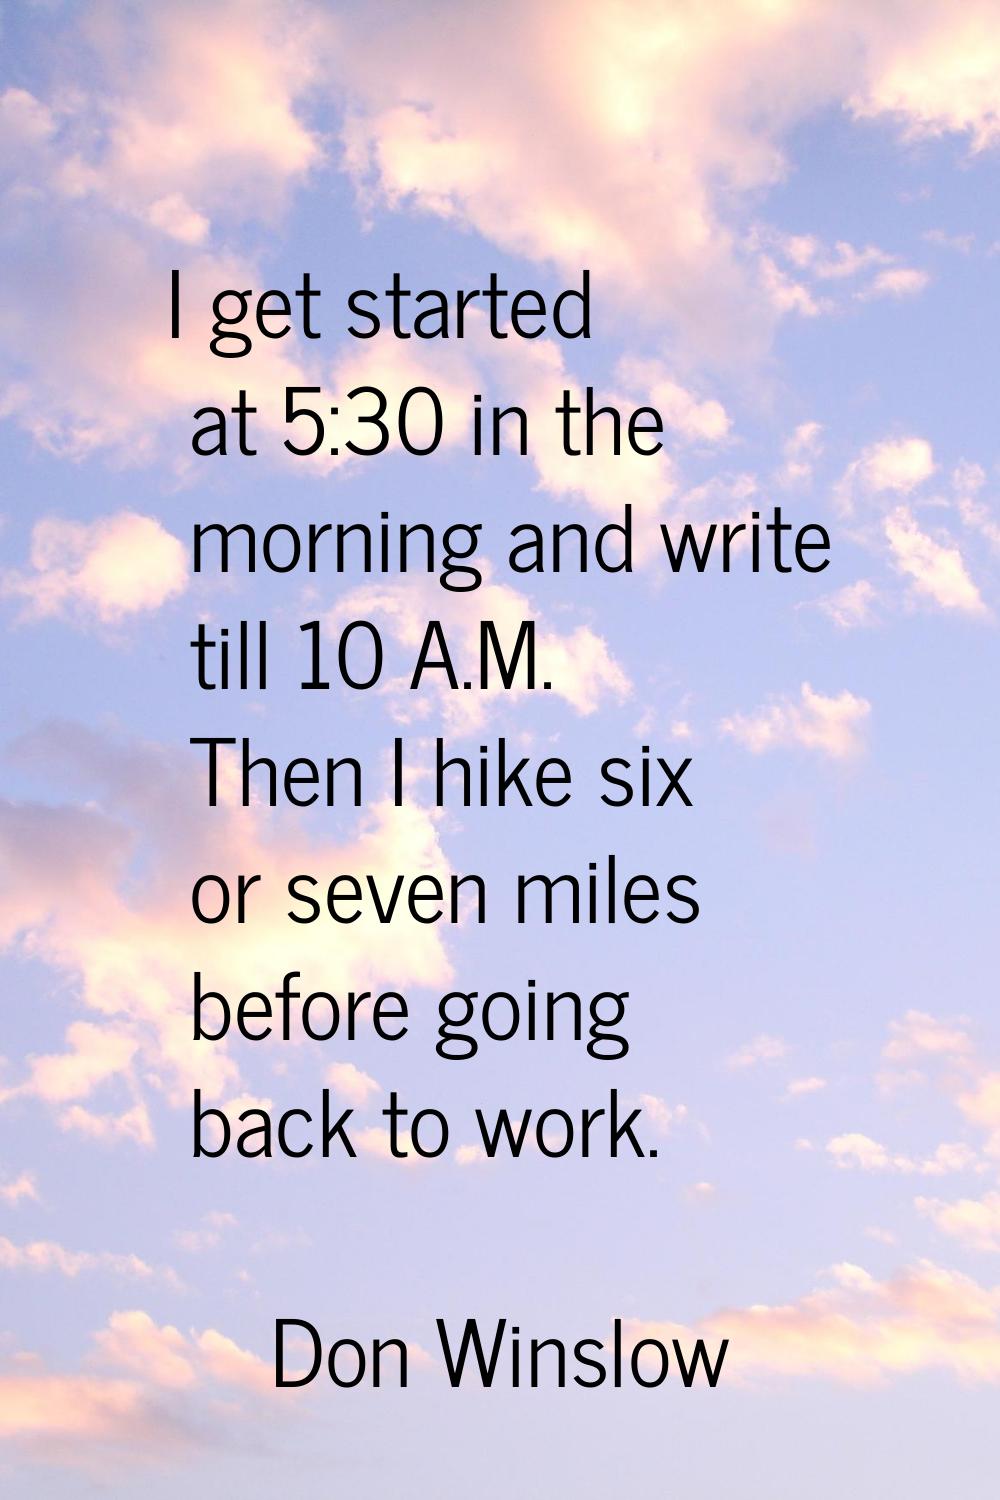 I get started at 5:30 in the morning and write till 10 A.M. Then I hike six or seven miles before g